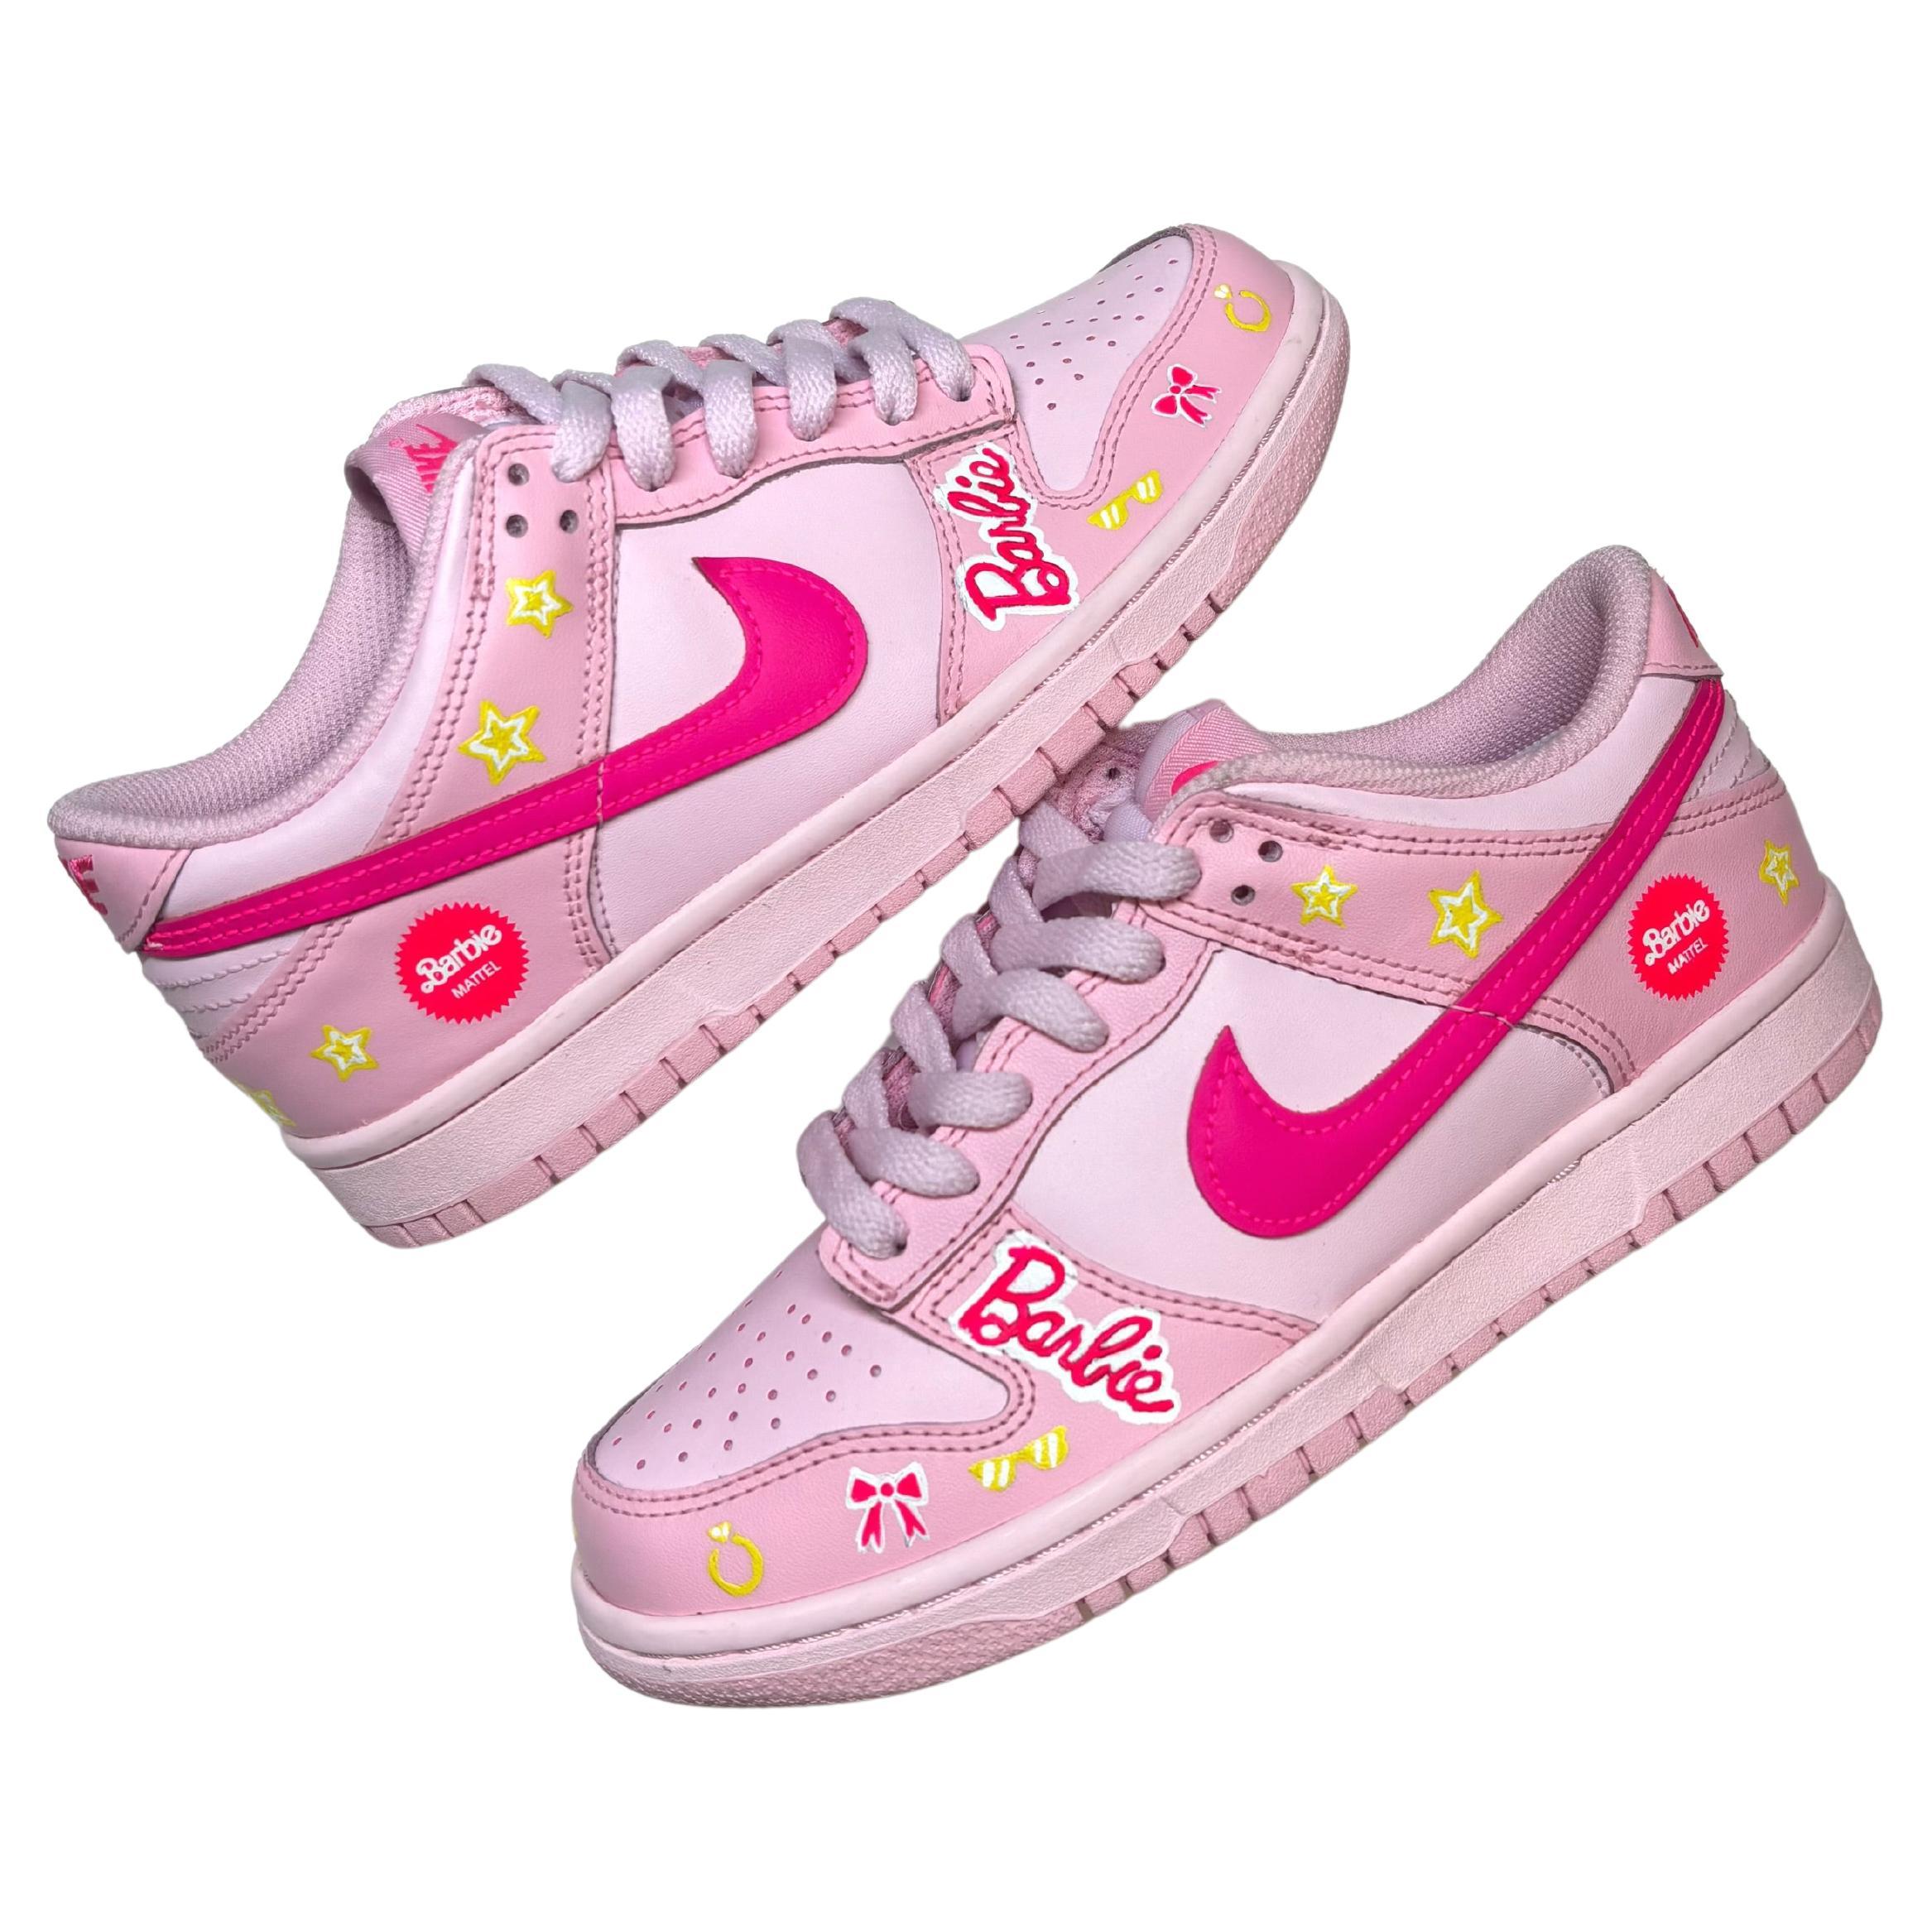 Barbie Custom Hand-Painted Nike Dunk Concept Sneakers by Reed Revesz For Sale